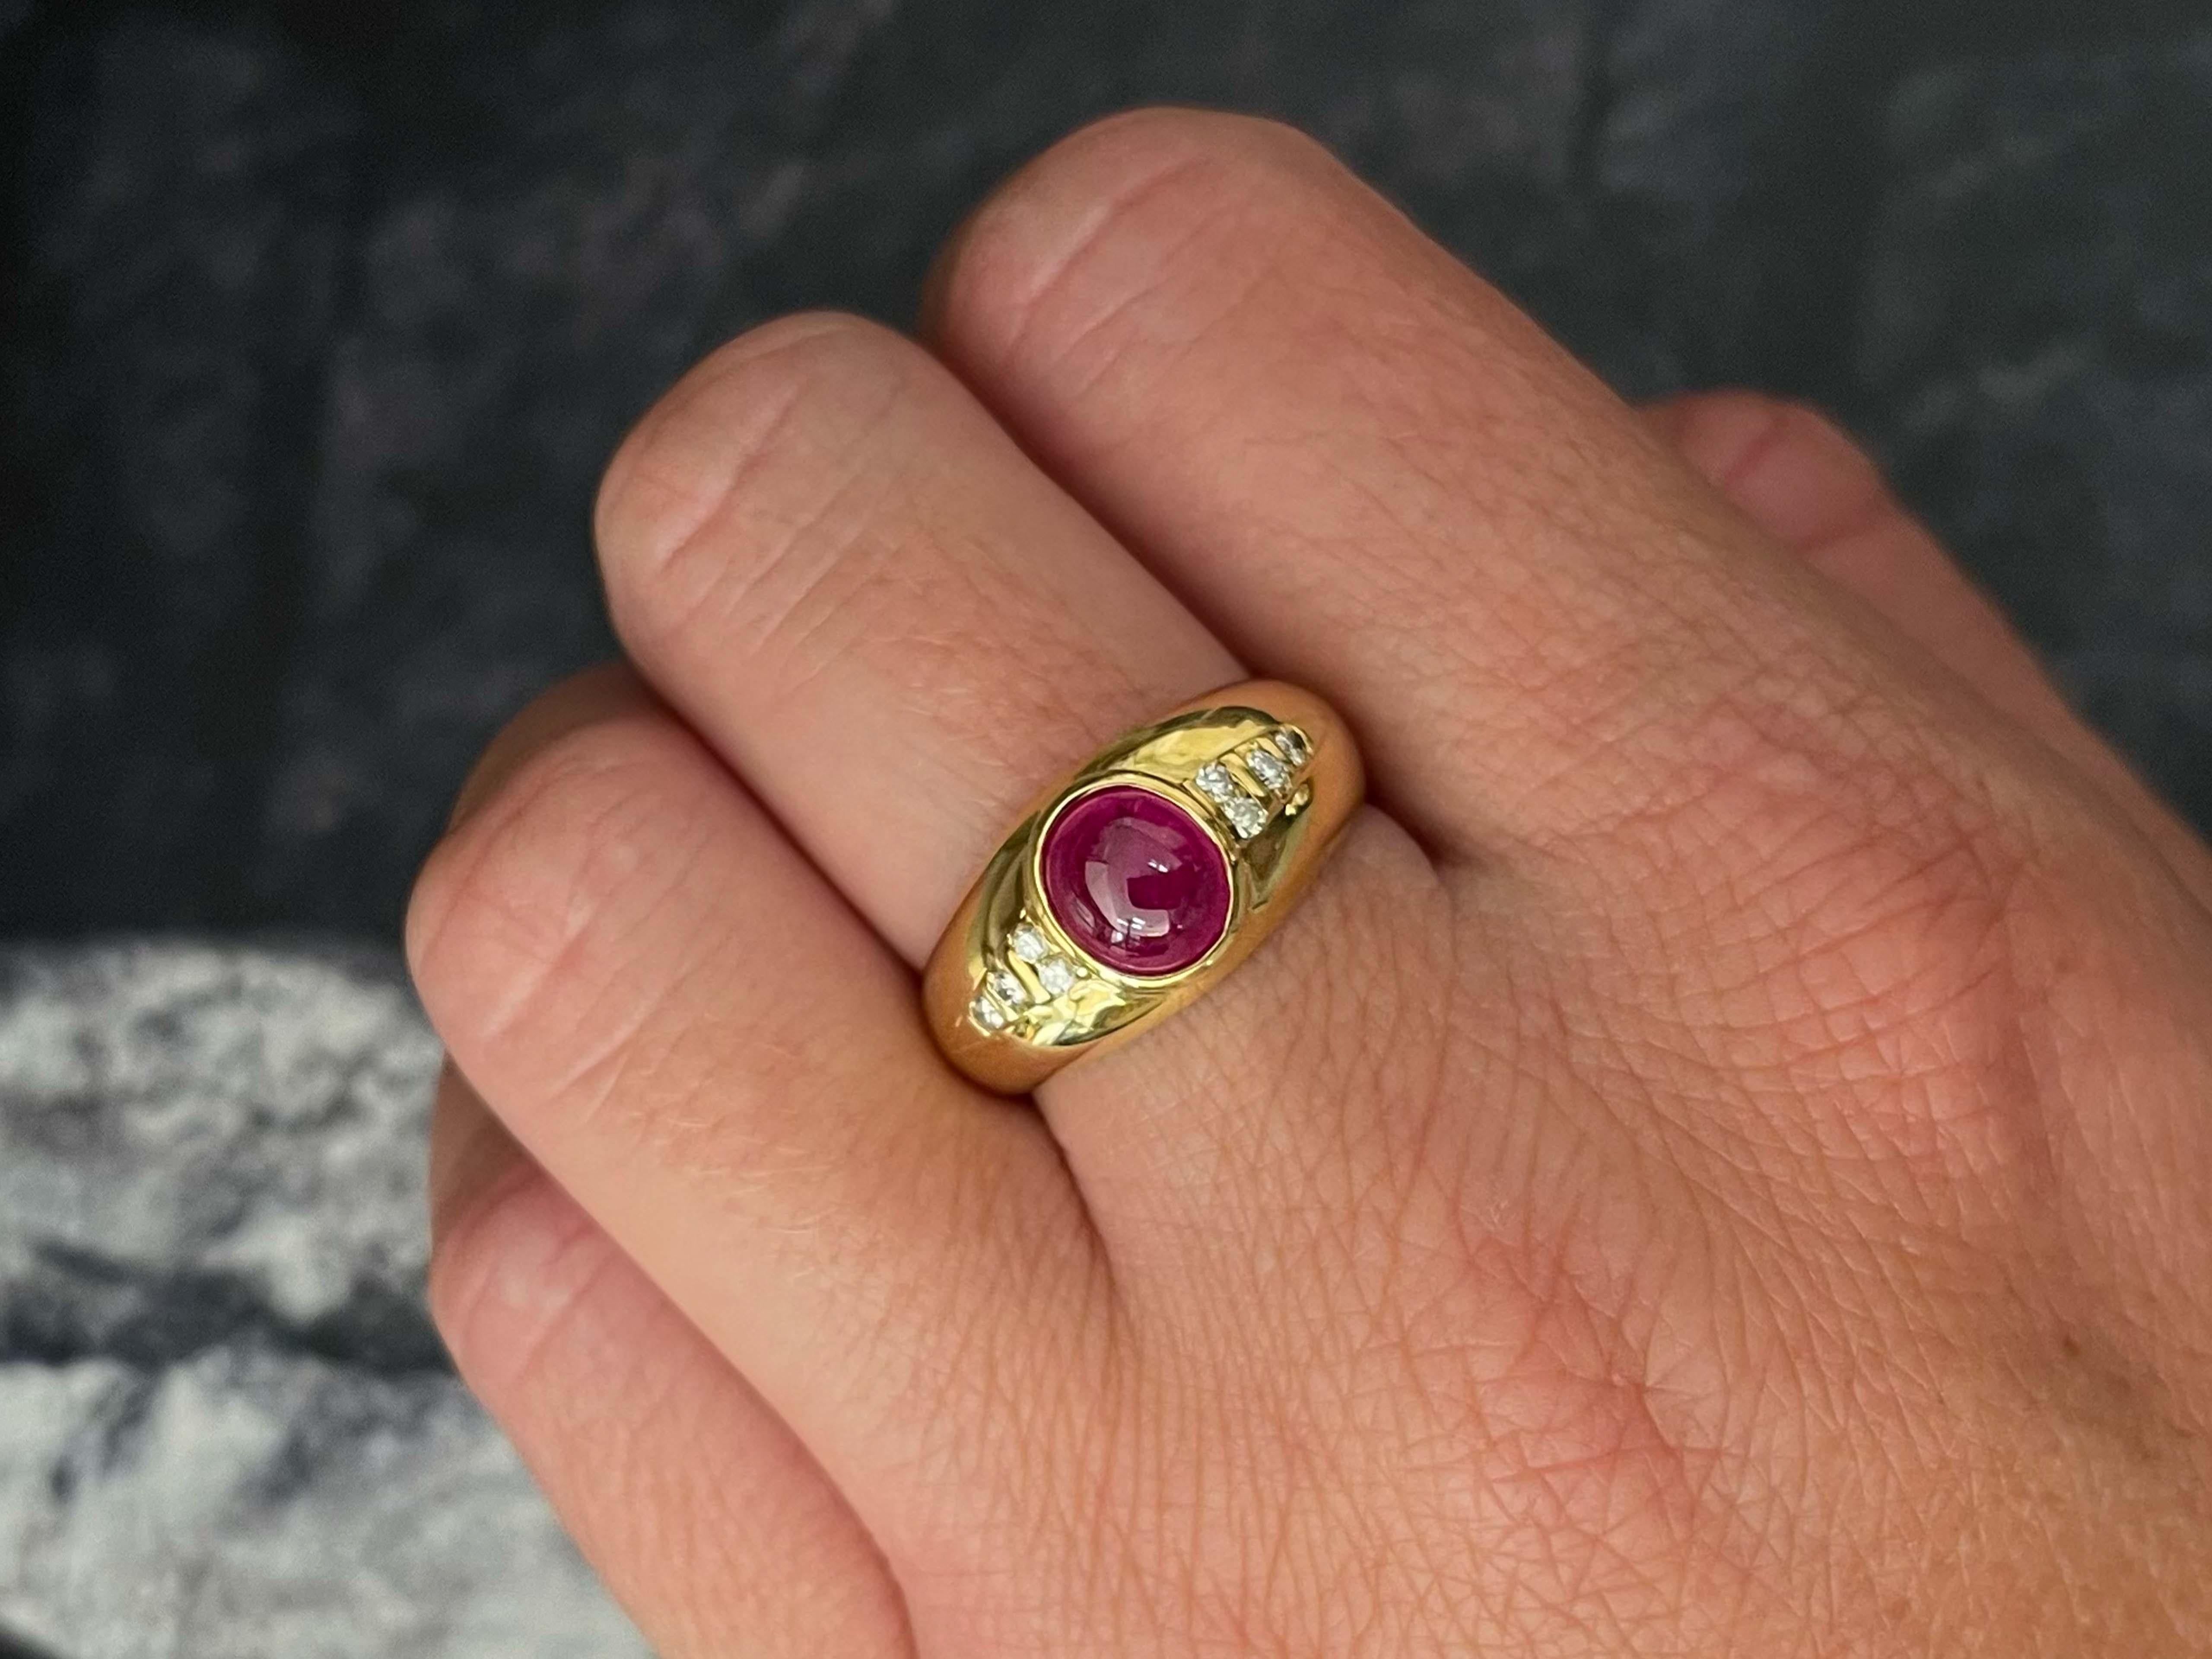 Item Specifications:

Metal: 18K Yellow Gold

Style: Statement Ring

Ring Size: 7.75 (resizing available for a fee)

Total Weight: 7.2 grams

Diamond Carat Weight: 0.16 carats

Diamond Color: G

Diamond Clarity: VS

Gemstone Specifications:
​
Ruby